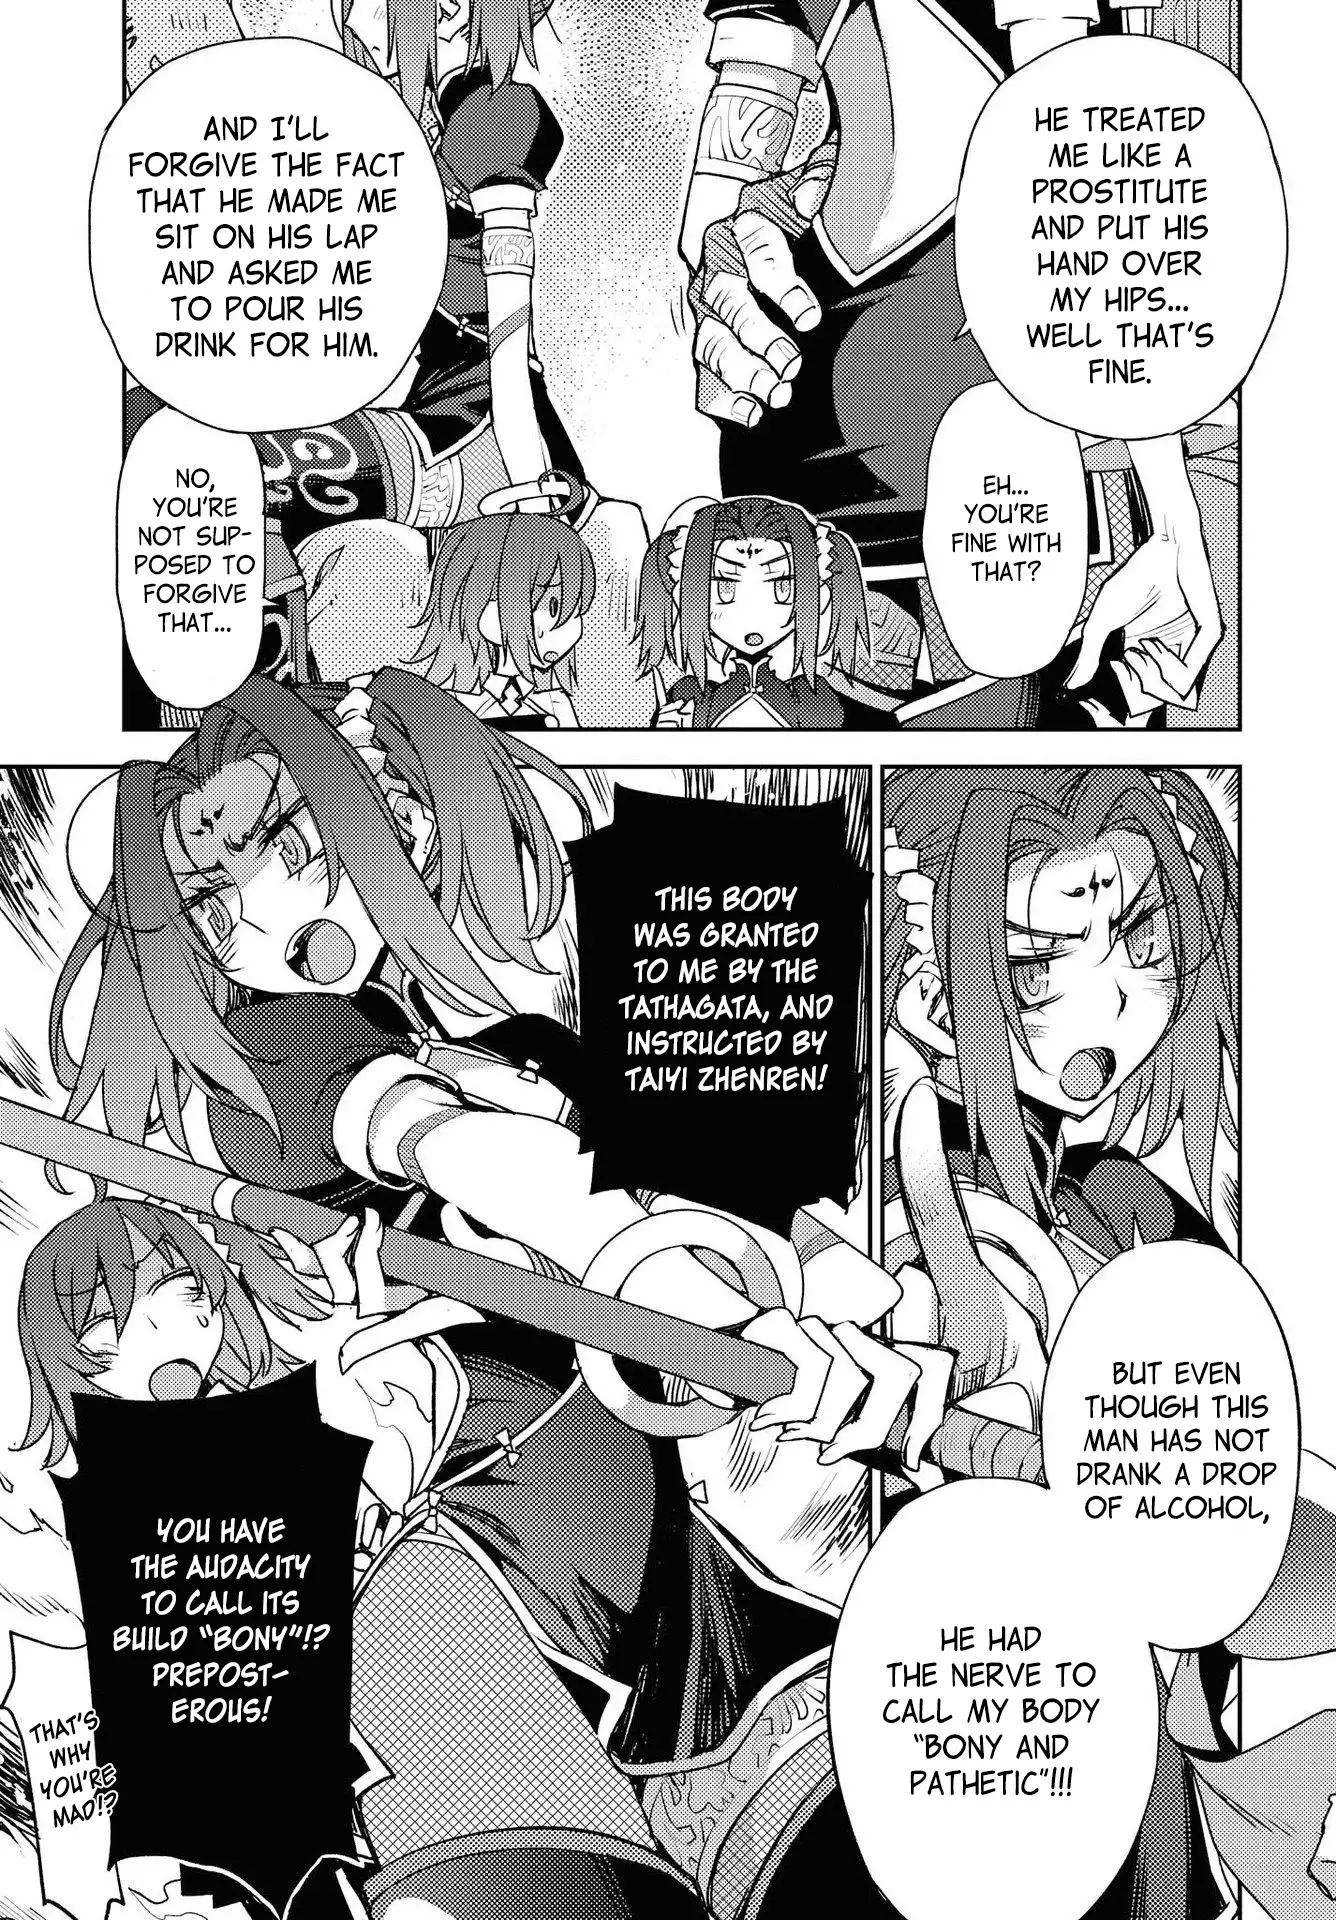 Fate/grand Order: Epic Of Remnant - Subspecies Singularity Iv: Taboo Advent Salem: Salem Of Heresy - 6 page 3